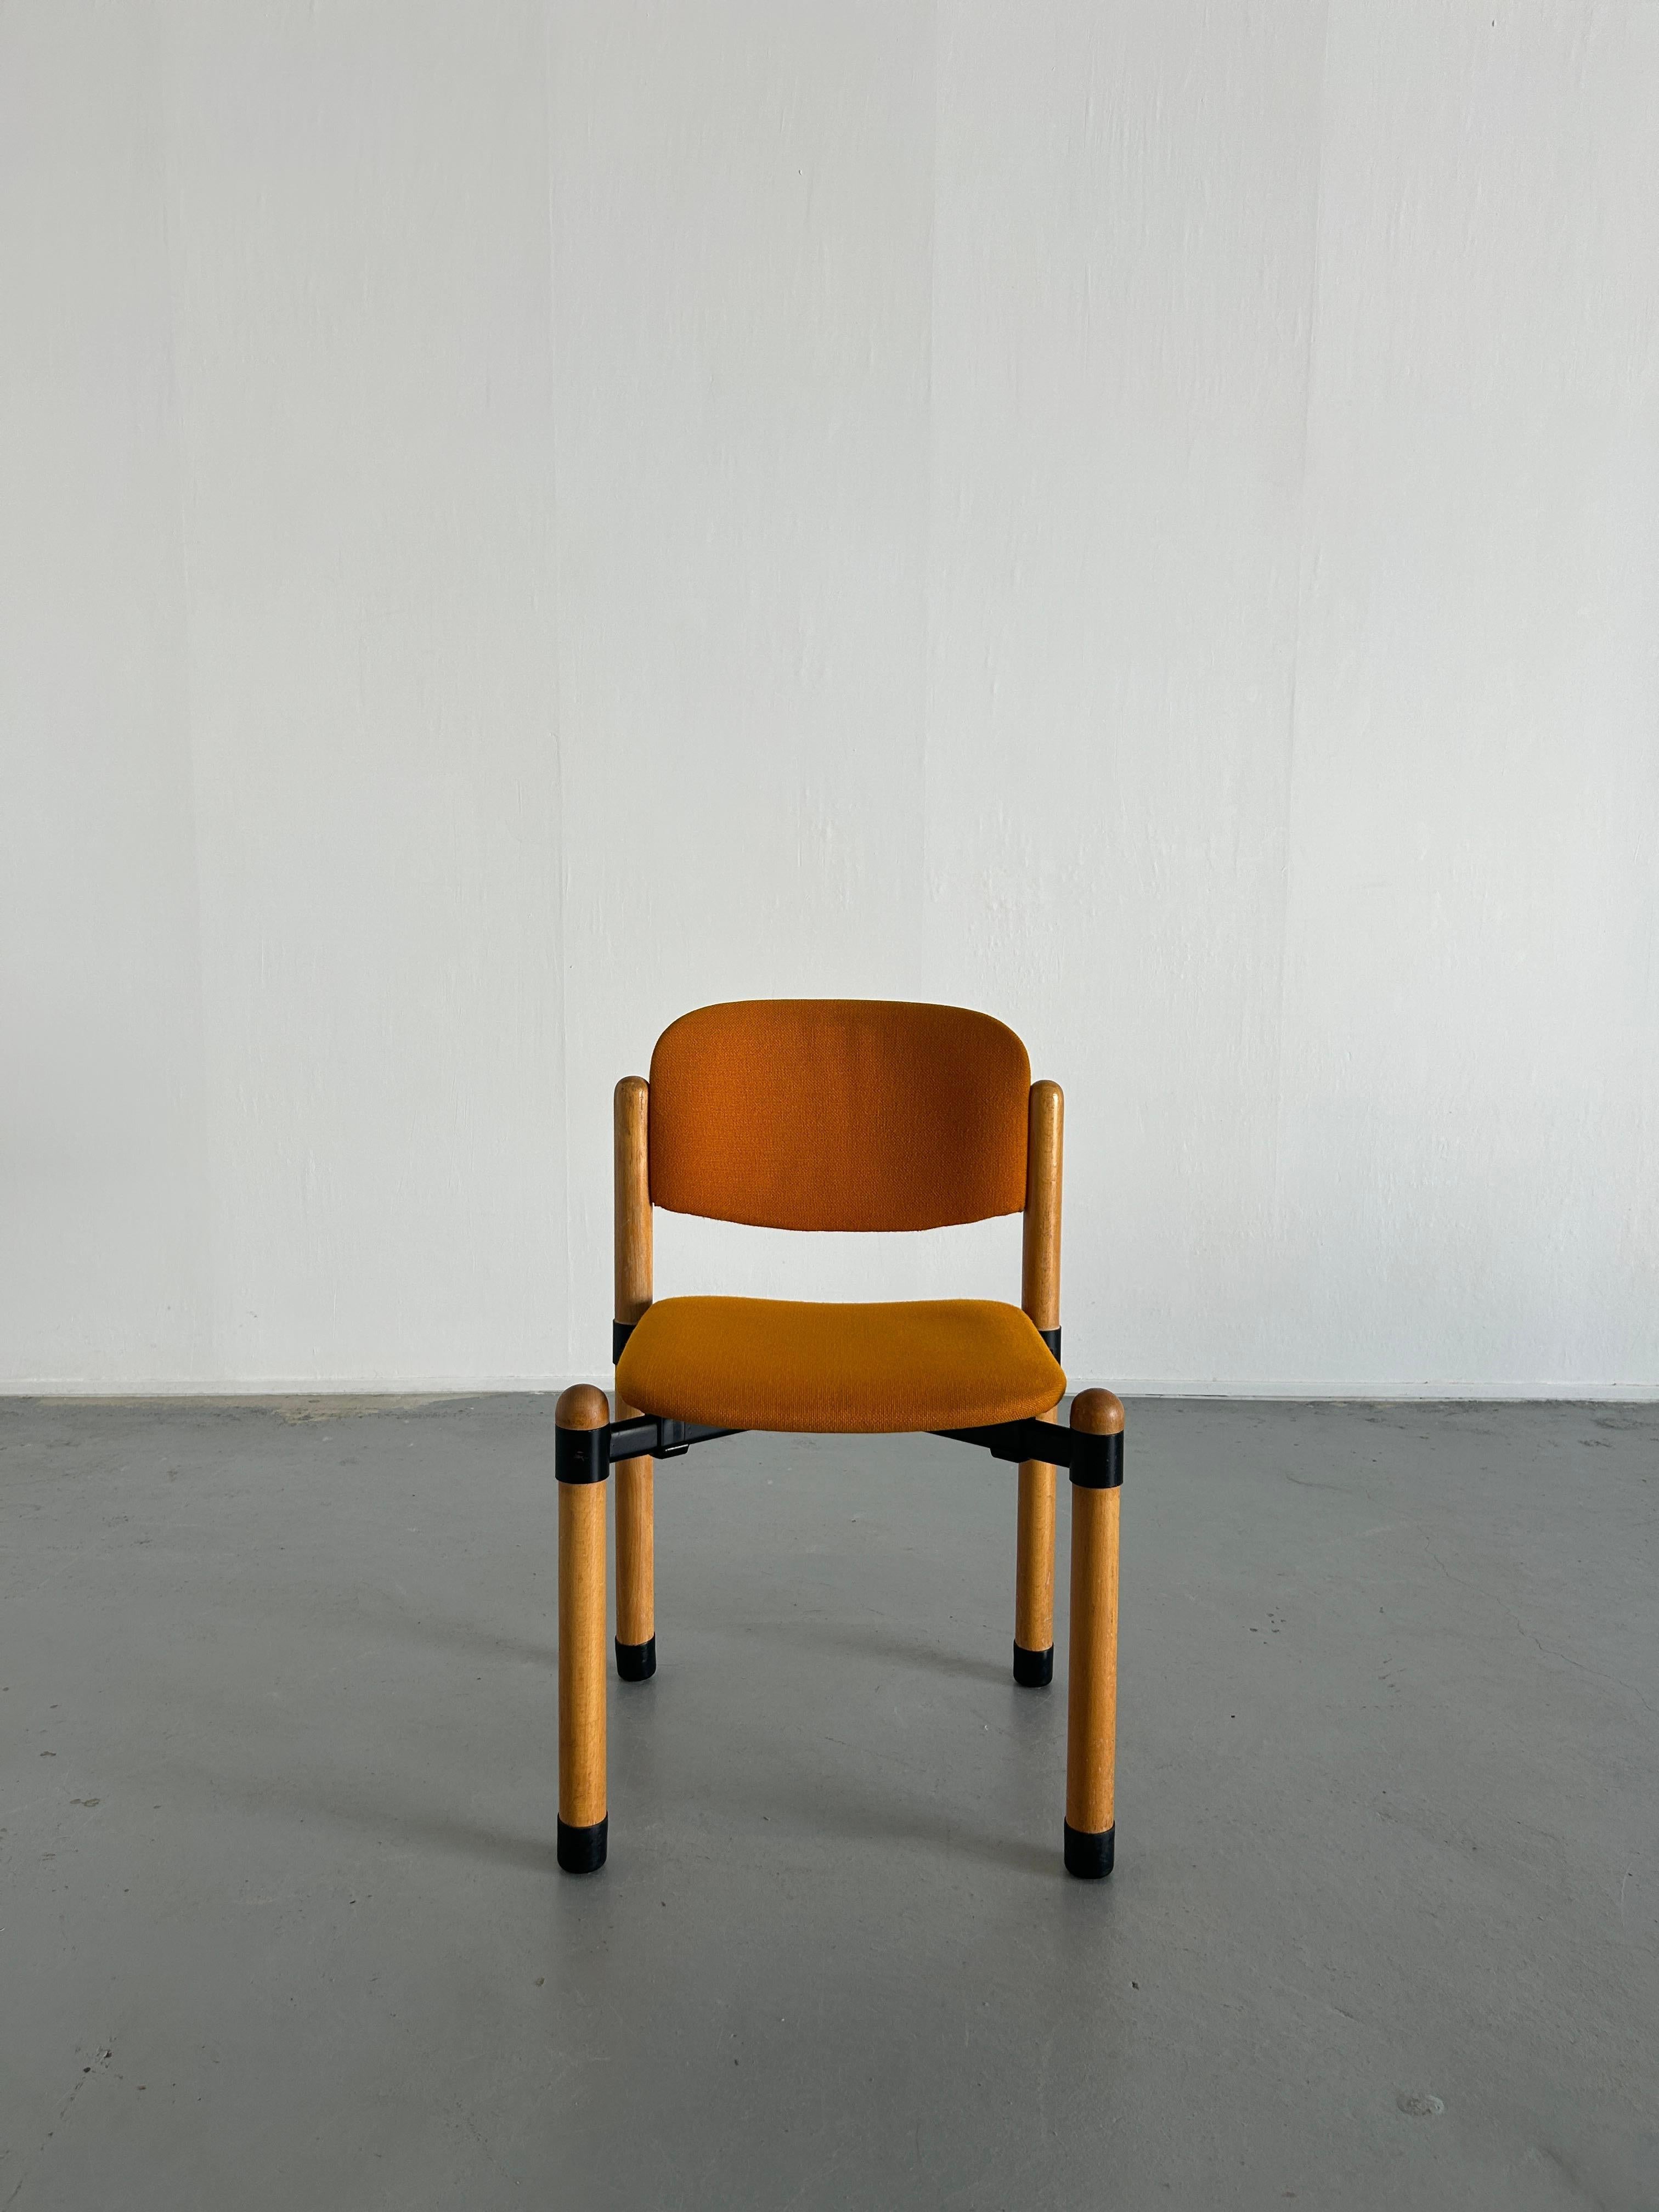 Late 20th Century 1/10 Mid Century Modern Stackable Dining Chairs by Fröscher Sitform, 70s Germany